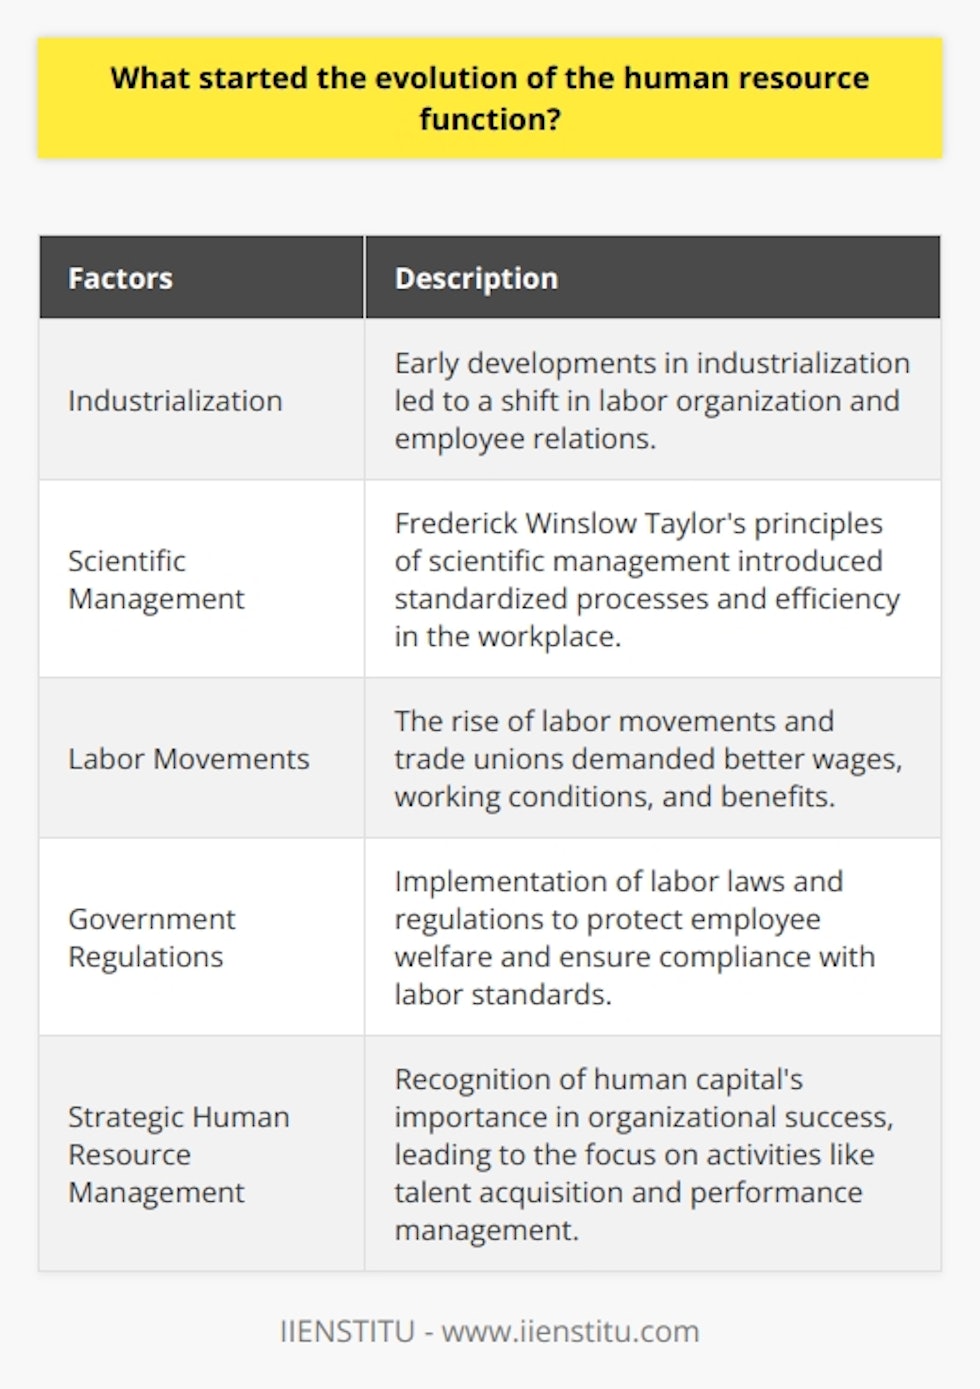 The evolution of the human resource function can be traced back to the early developments in industrialization and labor movements in the late 18th and early 19th centuries. The advent of factory systems during this time led to a major shift in the organization of labor and the management of employee relations. Employers were primarily concerned with maximizing productivity and maintaining control over the workforce.One of the earliest drivers of the human resource function was the emergence of scientific management in the 20th century, developed by Frederick Winslow Taylor. Taylor's principles of scientific management sought to establish standardized processes and efficiency in the workplace. This involved breaking down tasks into smaller units, defining clear job roles and responsibilities, and adopting a systematic approach to employee training and development.The rise of labor movements and trade unions also played a significant role in the development of the human resource function. As employees began to demand better wages, working conditions, and benefits, businesses had to find ways to manage these demands. This led to the establishment of dedicated personnel management departments and roles responsible for dealing with labor-related issues.Government regulations also contributed to the evolution of the human resource function. As governments recognized the need to protect the welfare of employees, labor laws and regulations were implemented. Employers had to comply with legal mandates related to minimum wages, working hours, employee safety, and other labor standards. This expanded the scope of human resource management beyond addressing grievances and productivity to ensuring compliance with regulatory requirements.In recent years, there has been a shift towards strategic human resource management. The importance of human capital in fostering organizational success has been recognized, leading to the human resource function becoming a strategic component. Contemporary human resource management involves activities such as talent acquisition, employee engagement, performance management, and succession planning, aimed at enhancing overall organizational effectiveness.In conclusion, the evolution of the human resource function can be attributed to various factors, including industrialization, scientific management, labor movements, and government regulations. The function has adapted to meet the changing demands of organizations and employees, becoming a critical strategic component in driving organizational performance.